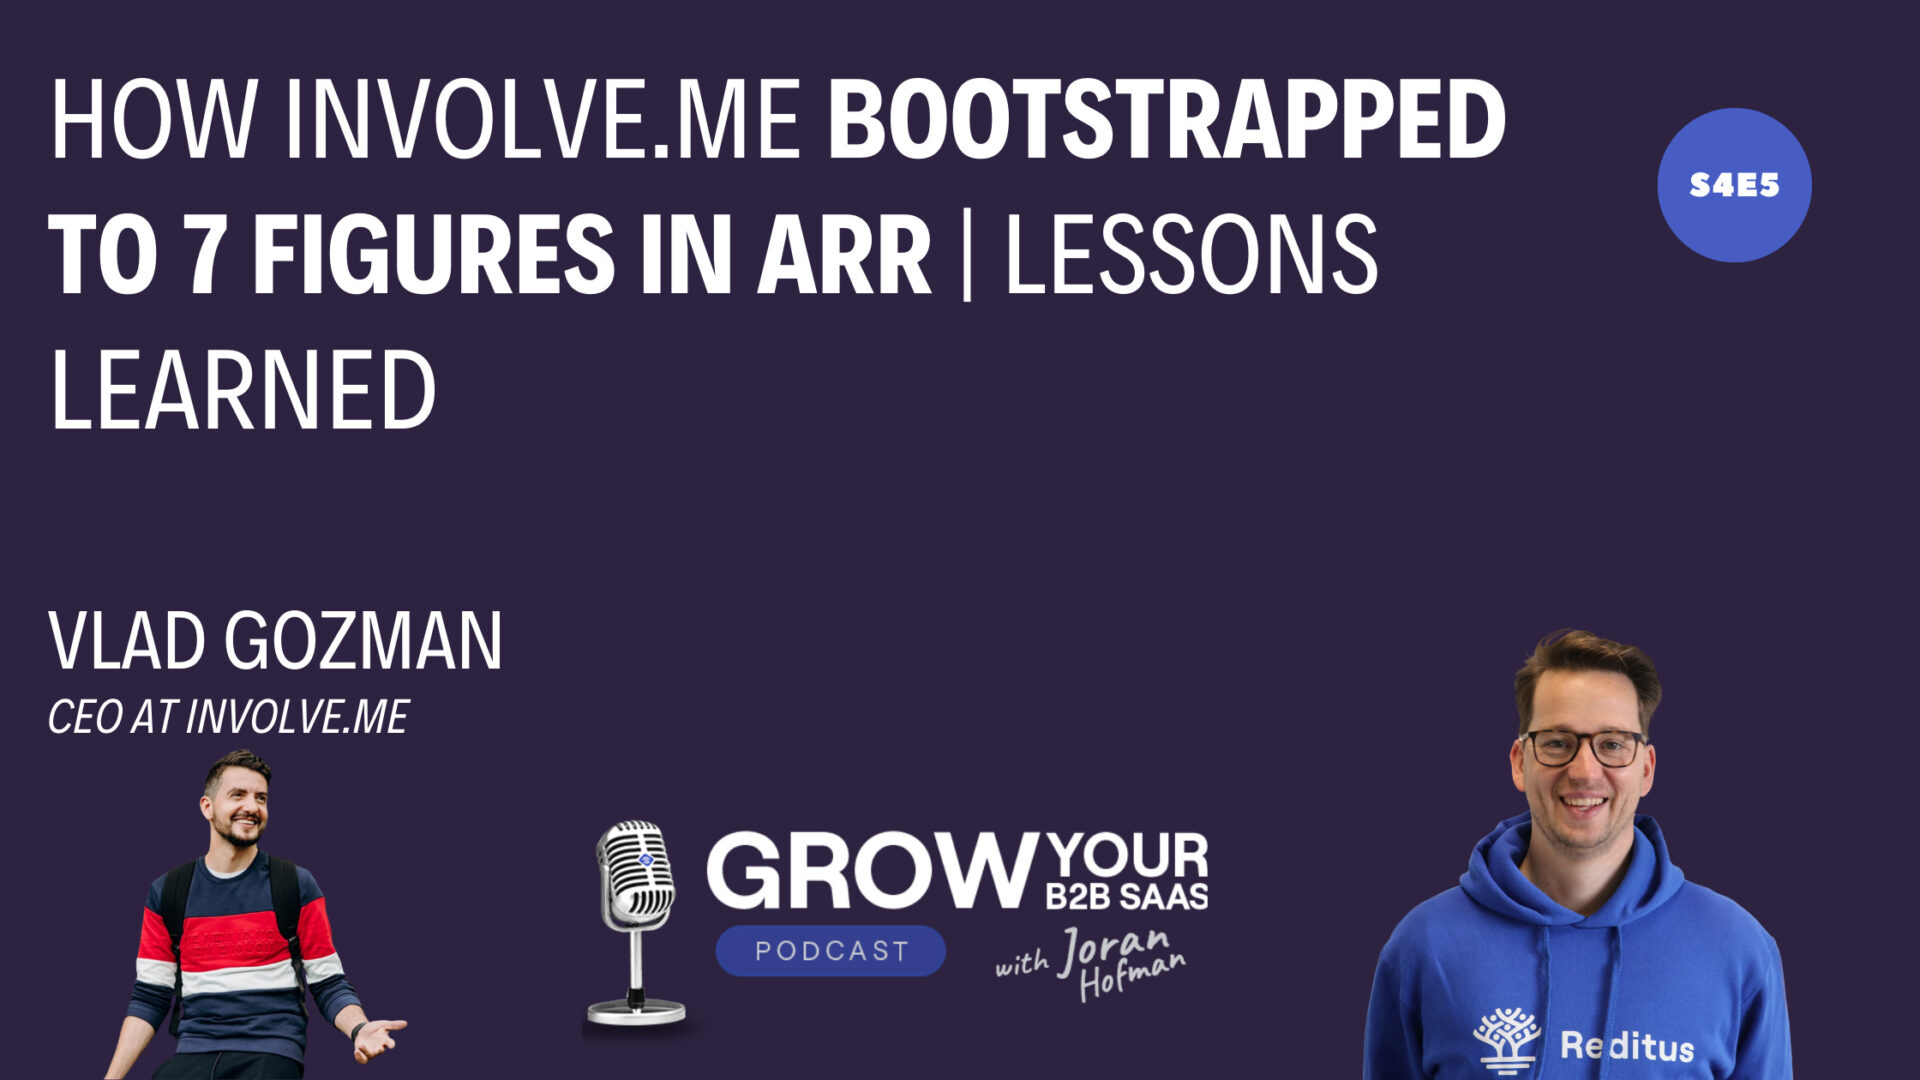 S4E5 – How Involve.me Bootstrapped To 7 Figures in ARR | Lessons Learned With Vlad Gozman